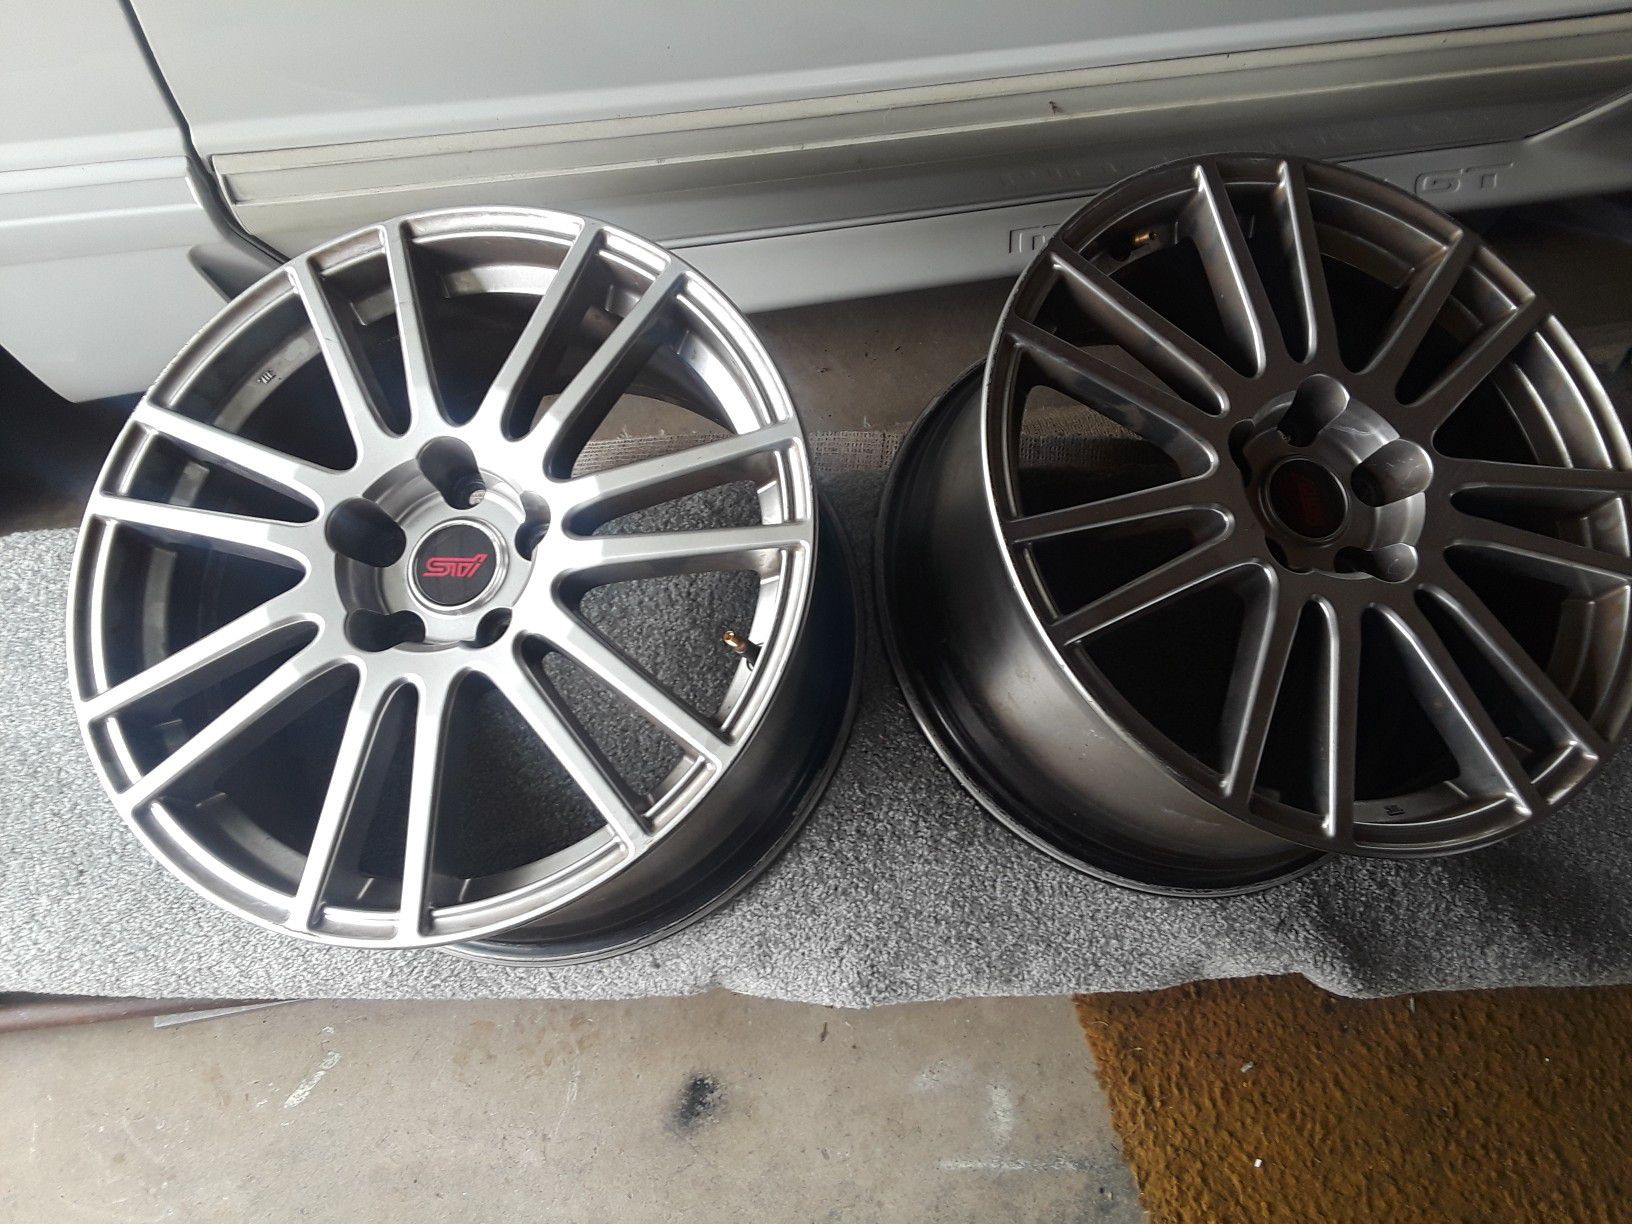 STI Rims And Other parts